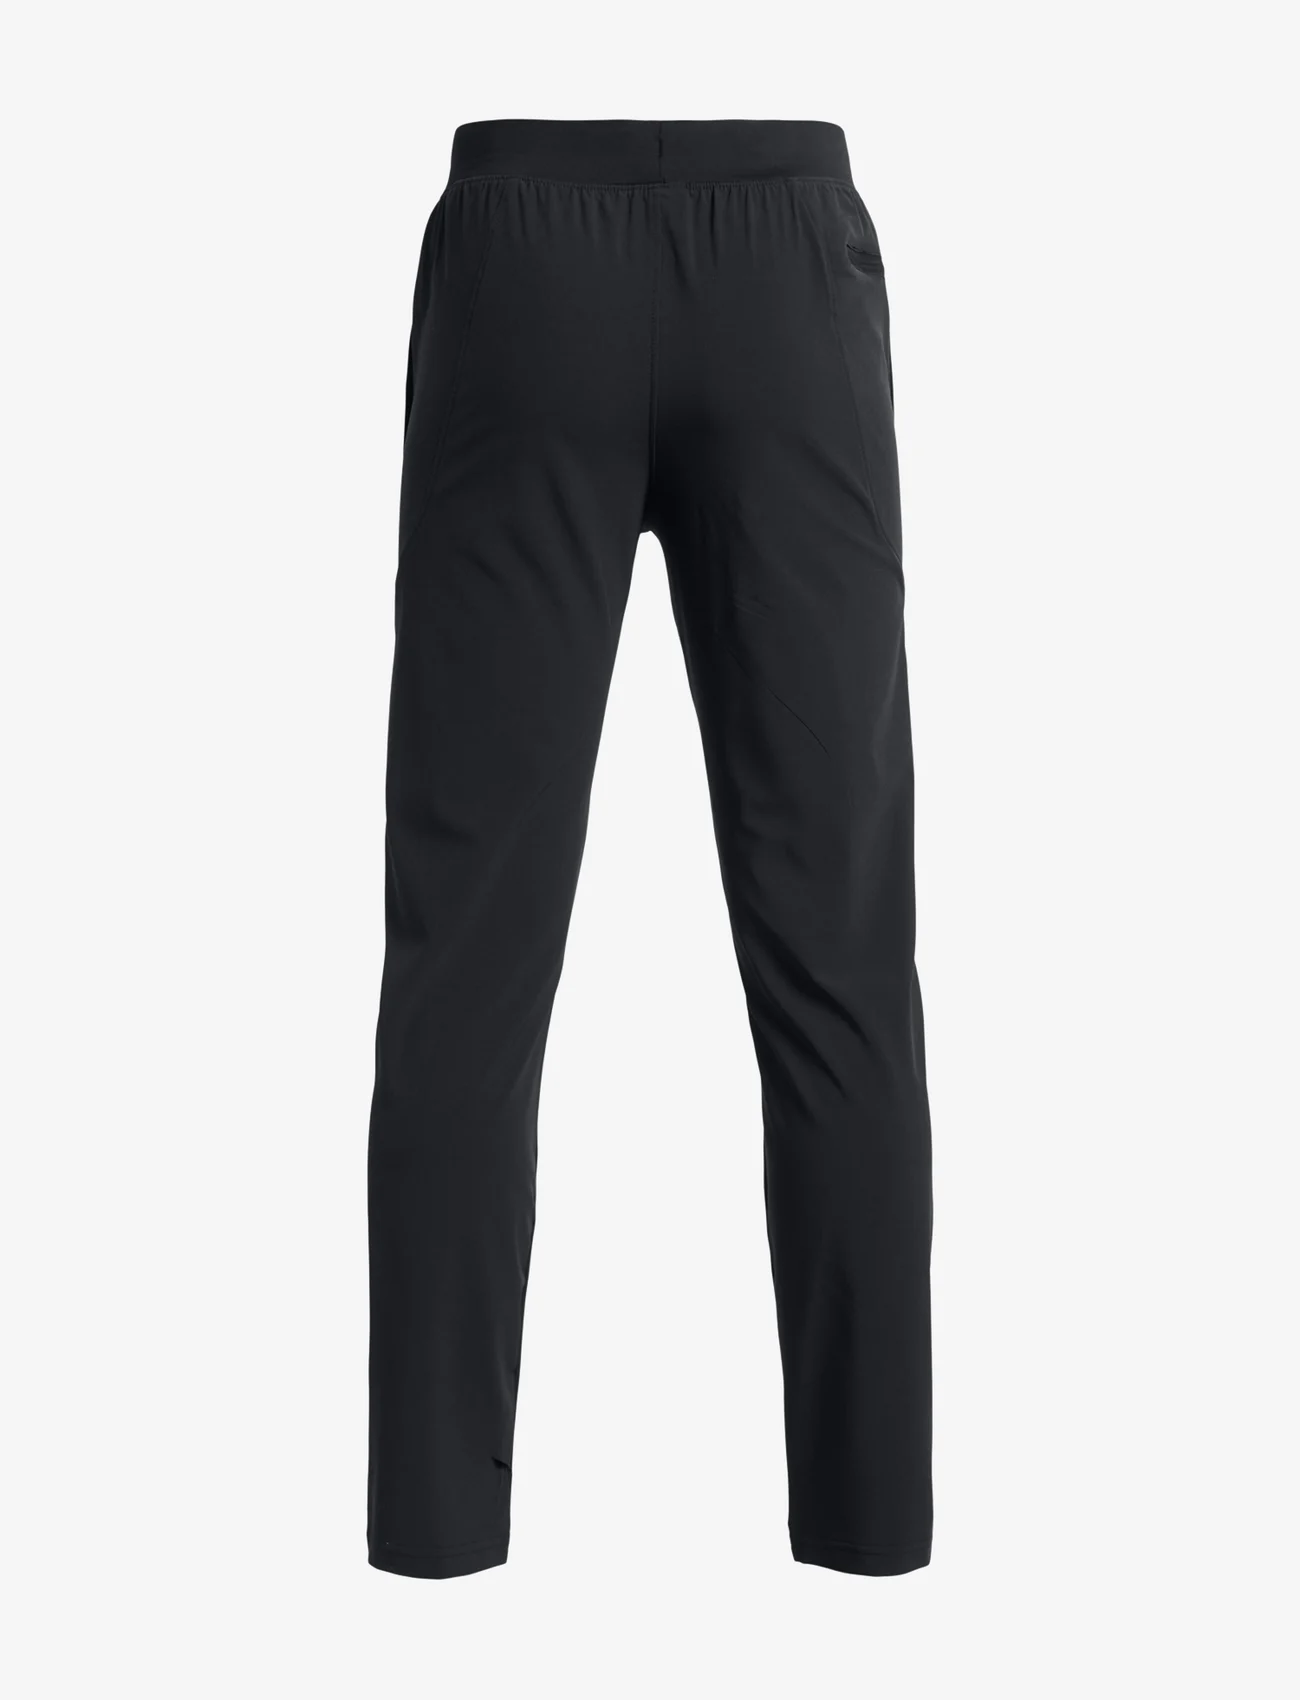 Under Armour - UA Unstoppable Tapered Pant - sports pants - black - 1